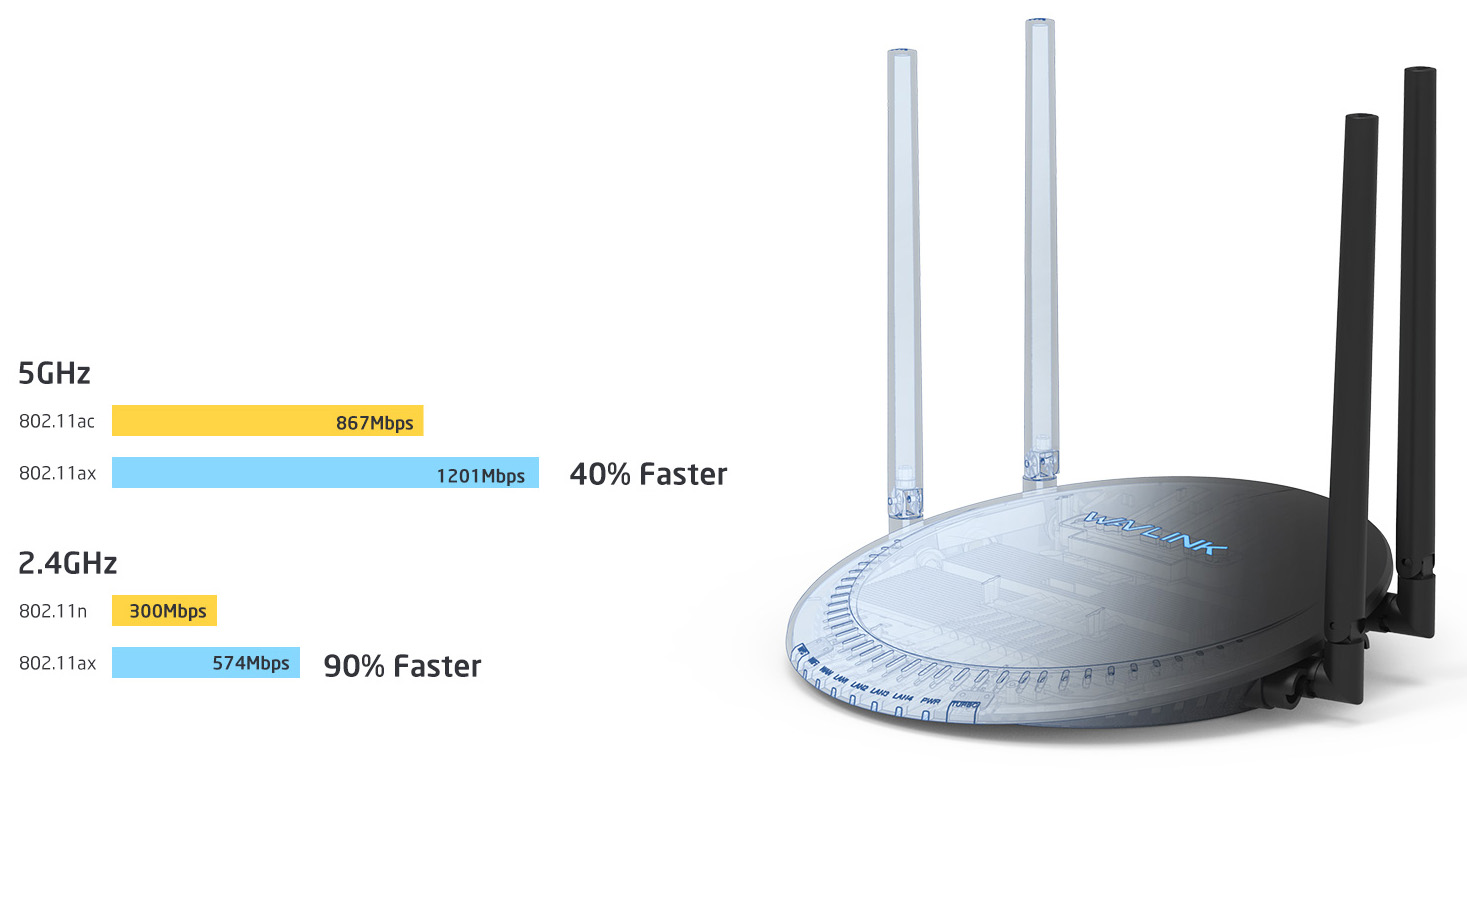 WAVLINK WiFi 6 Router,AX1800 Dual Band 2.4GHz/5GHz Gigabit Wireless  Internet Mesh Router up to 1500 Square Feet Coverage & 64+Devices